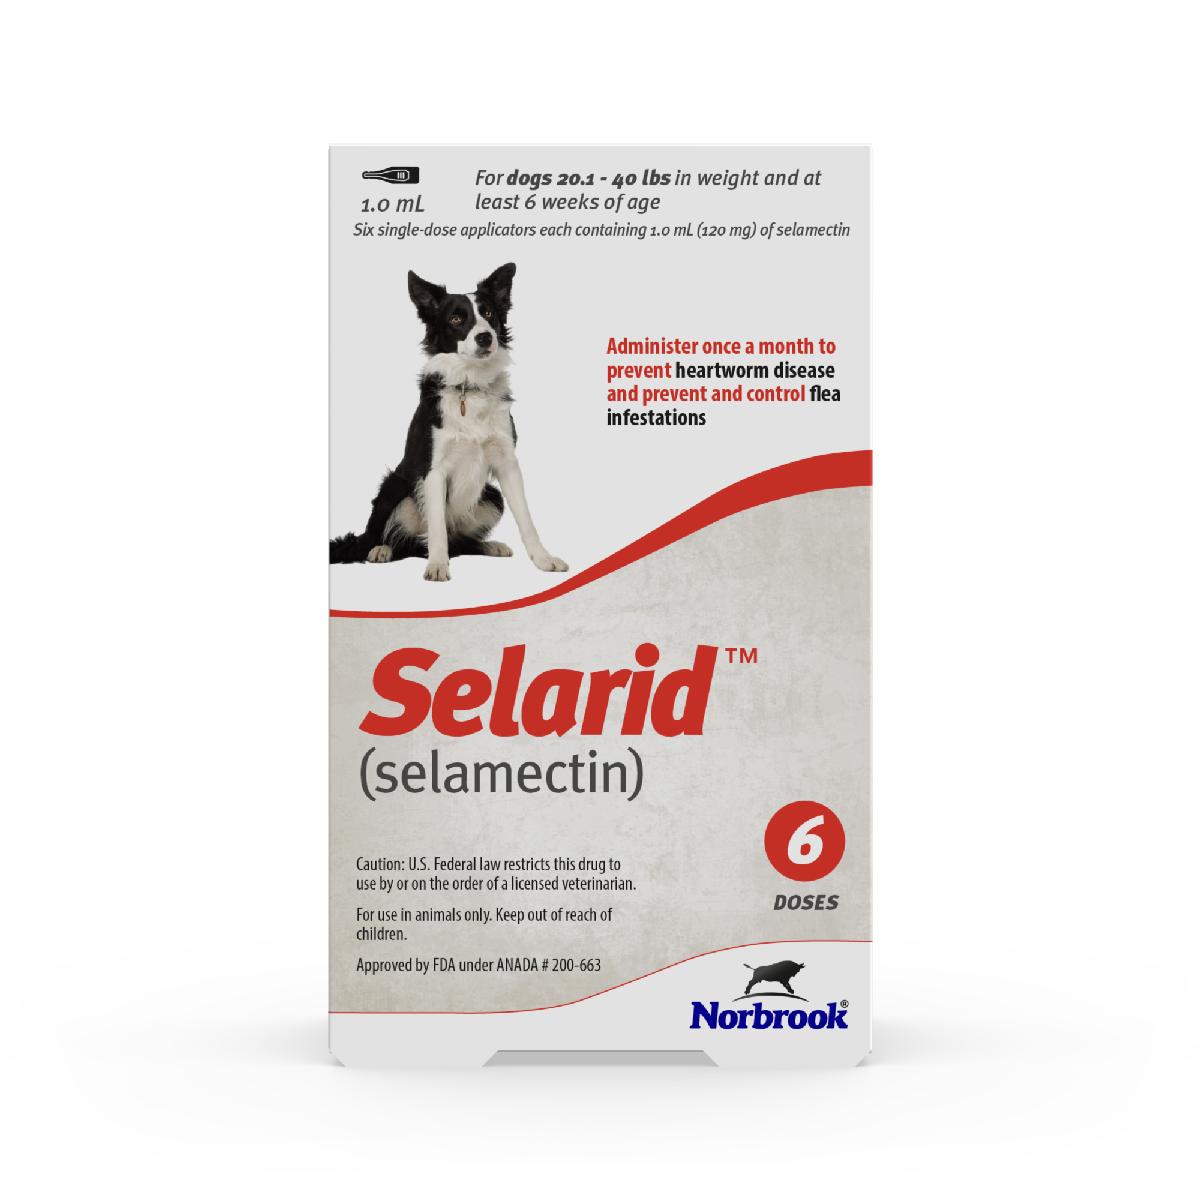 Selarid (selamectin) Topical Parasiticide for Dogs 20.140 lbs, 6 count